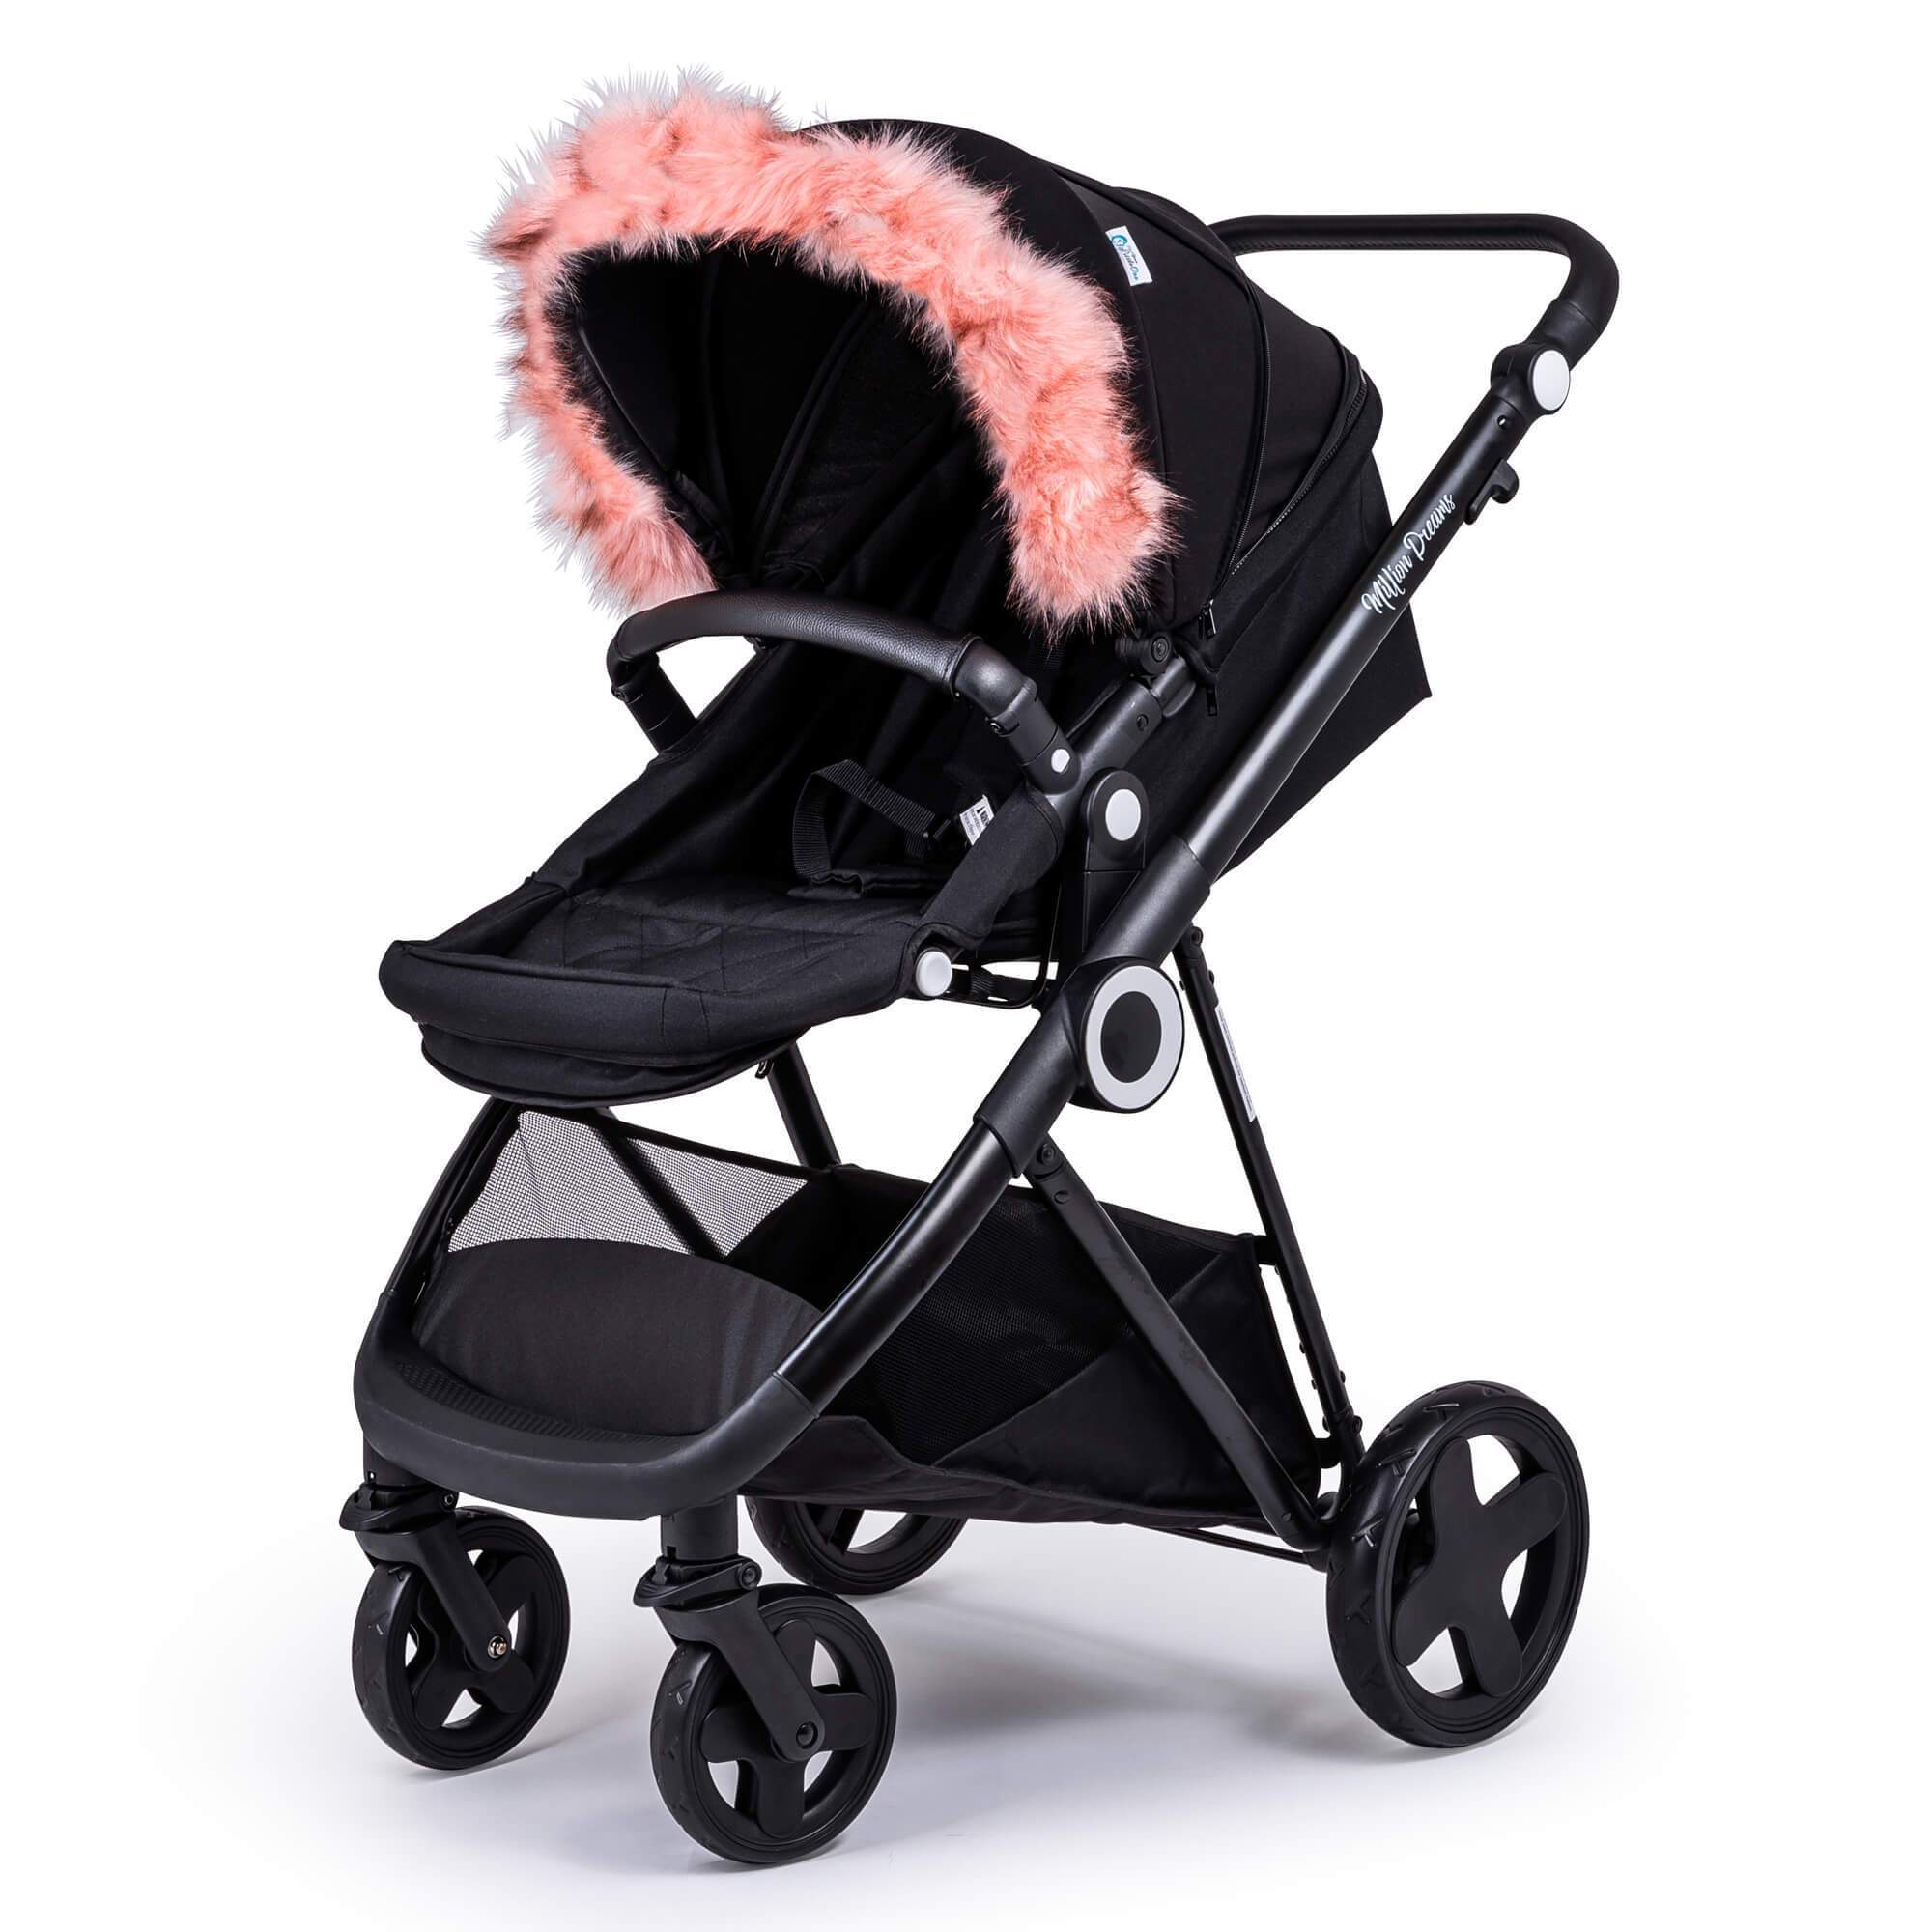 Pram Fur Hood Trim Attachment for Pushchair Compatible with Easywalker - Pink / Fits All Models | For Your Little One